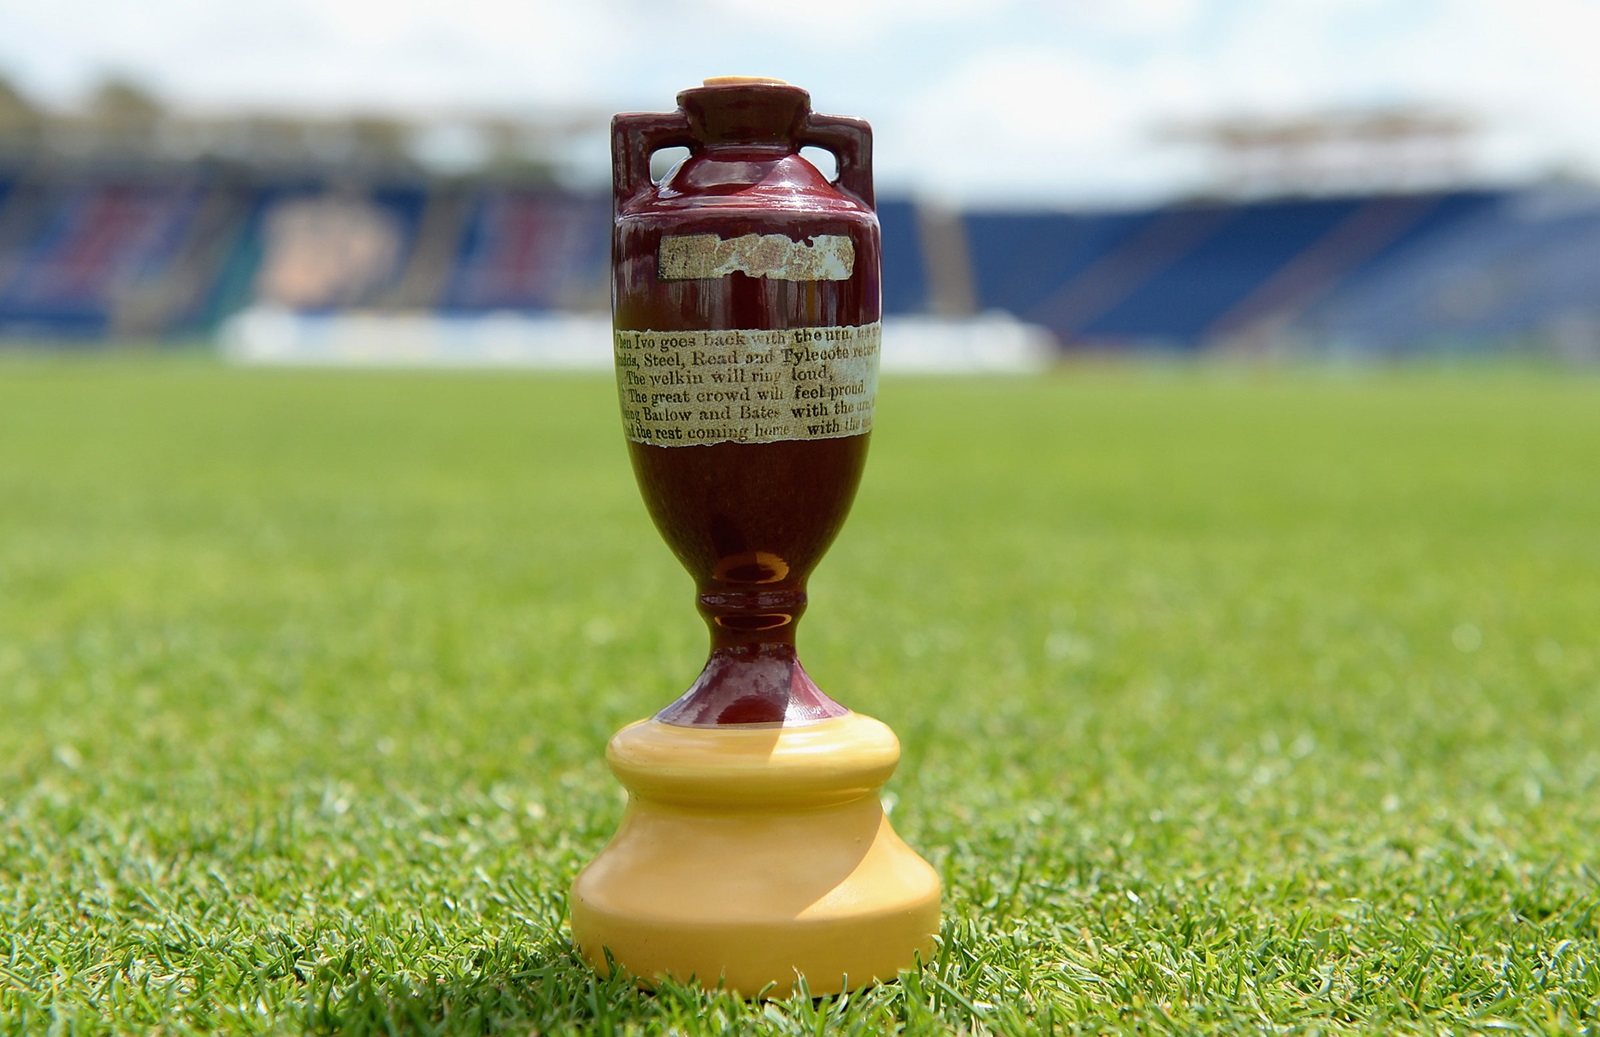 The Ashes begins on 1st of August at Brim